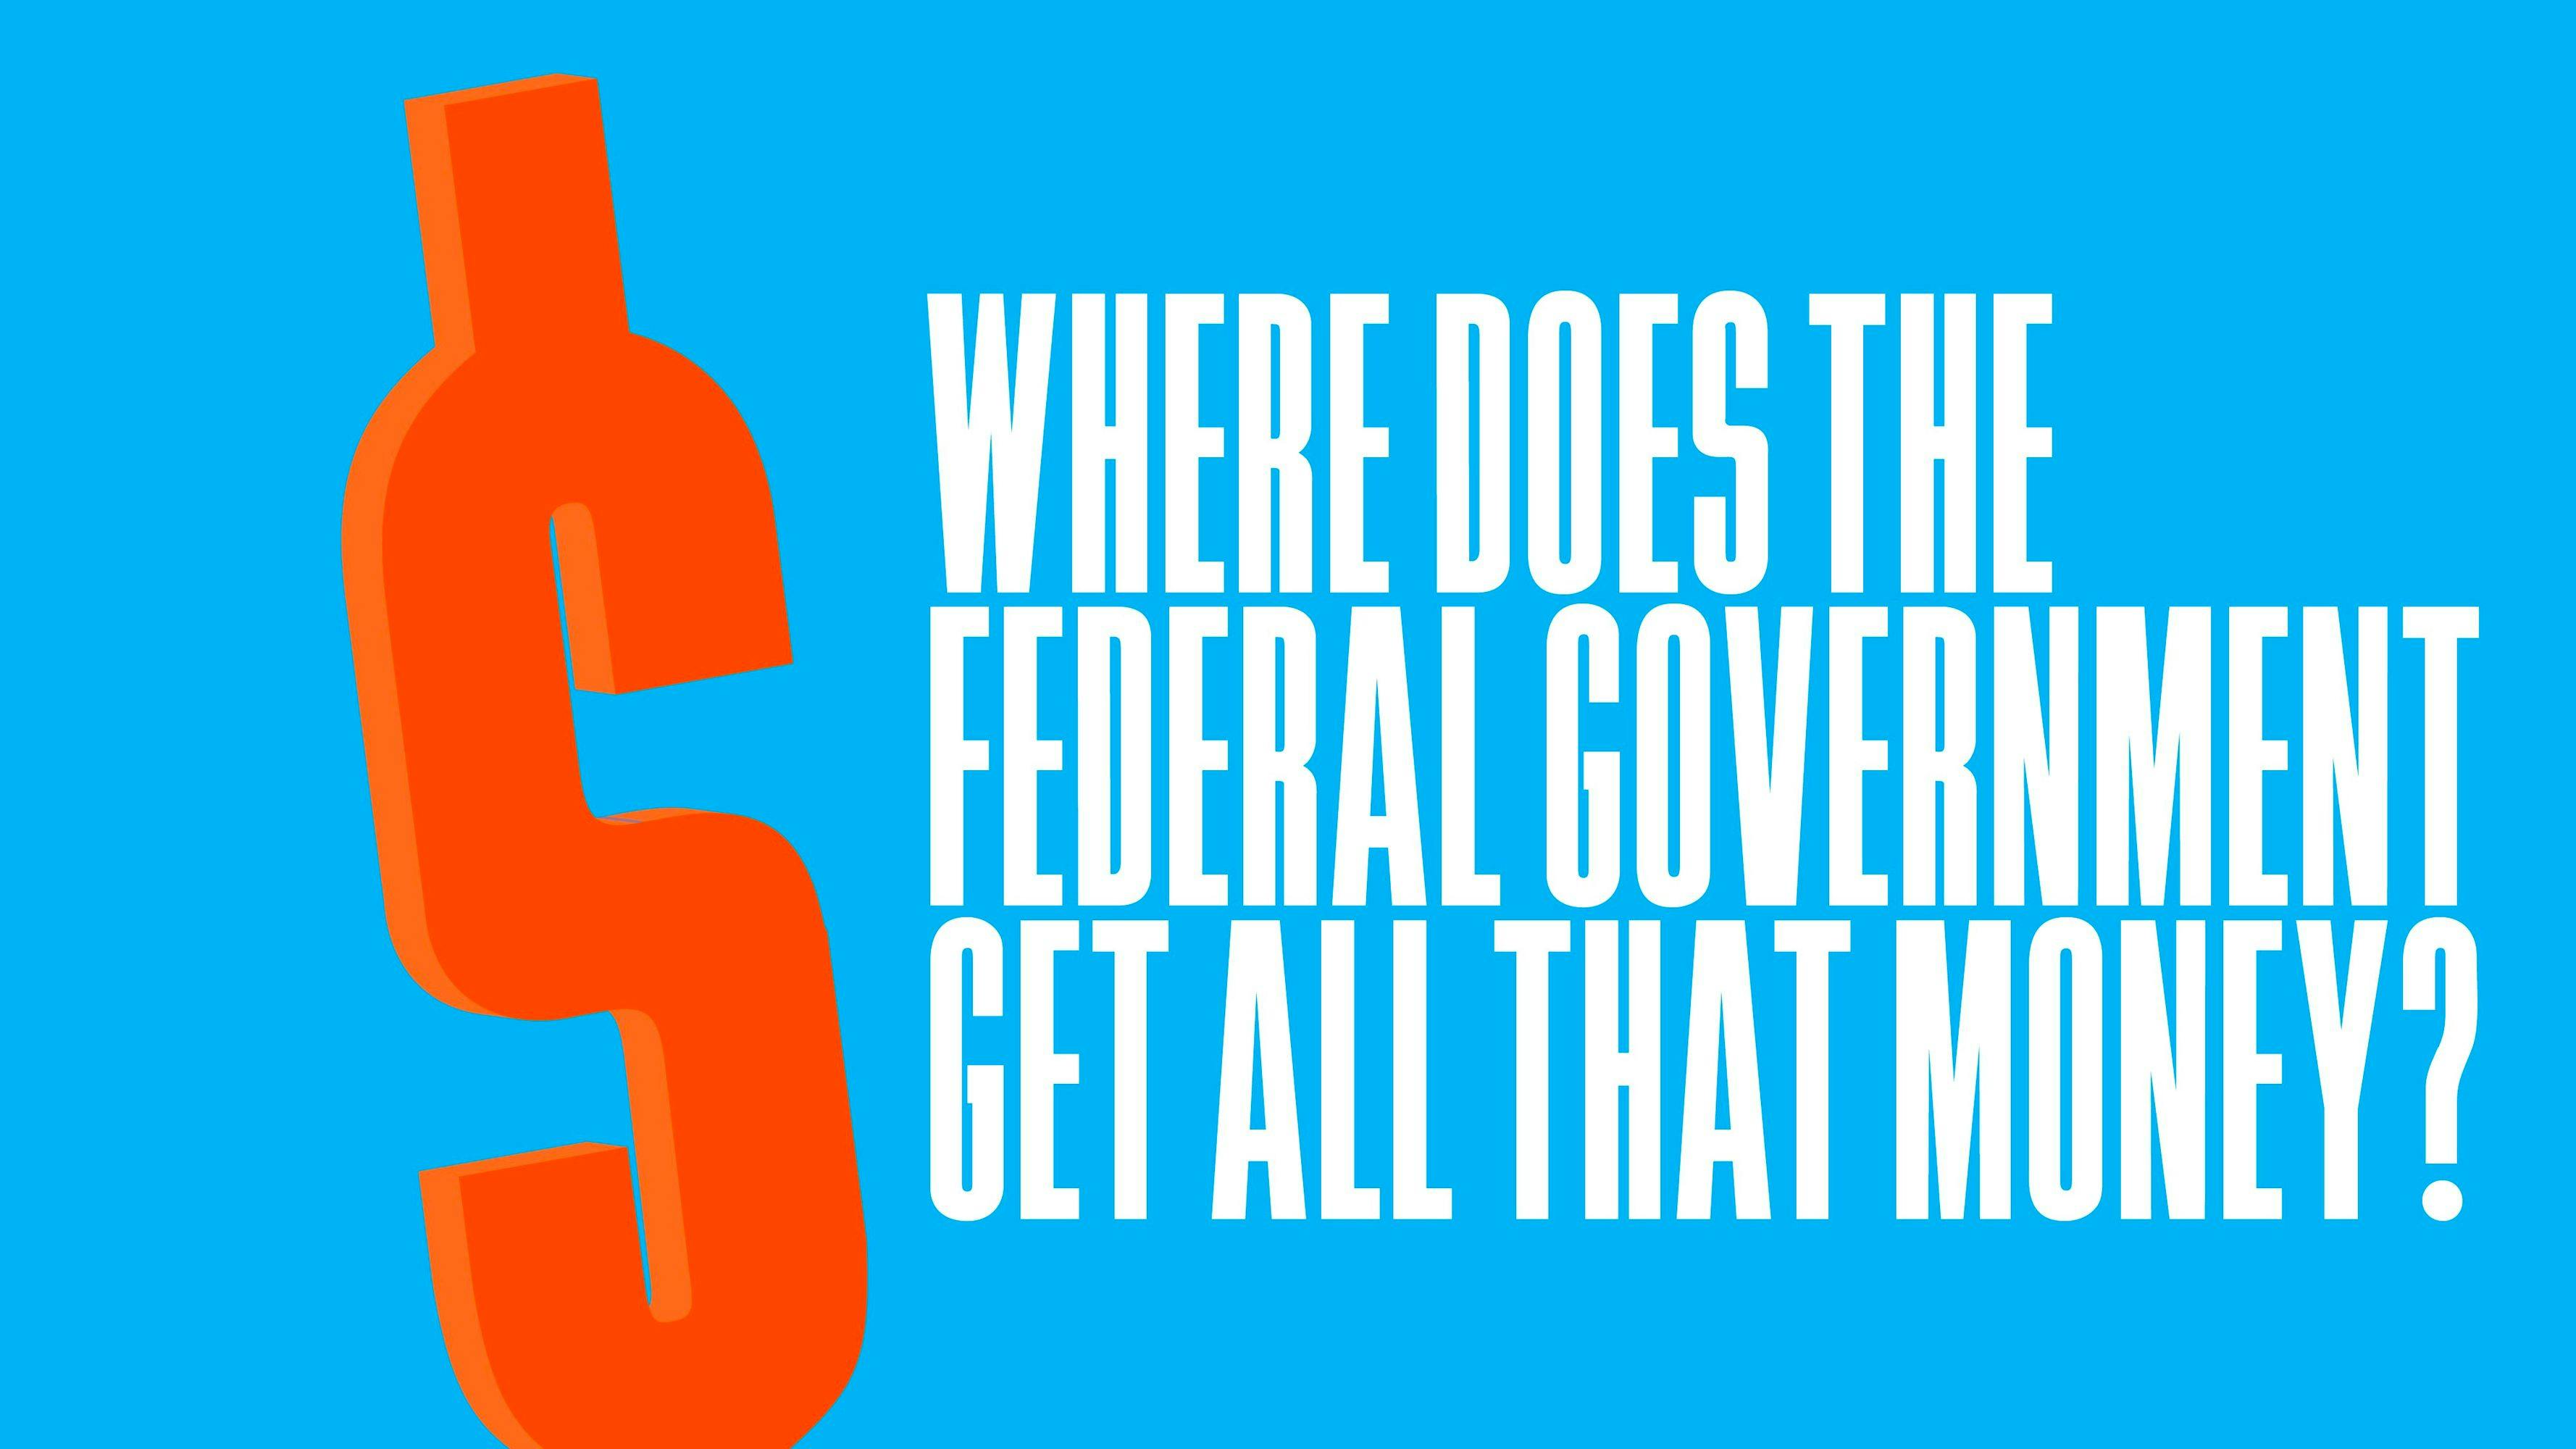 Where Does the Federal Government Get All That Money?